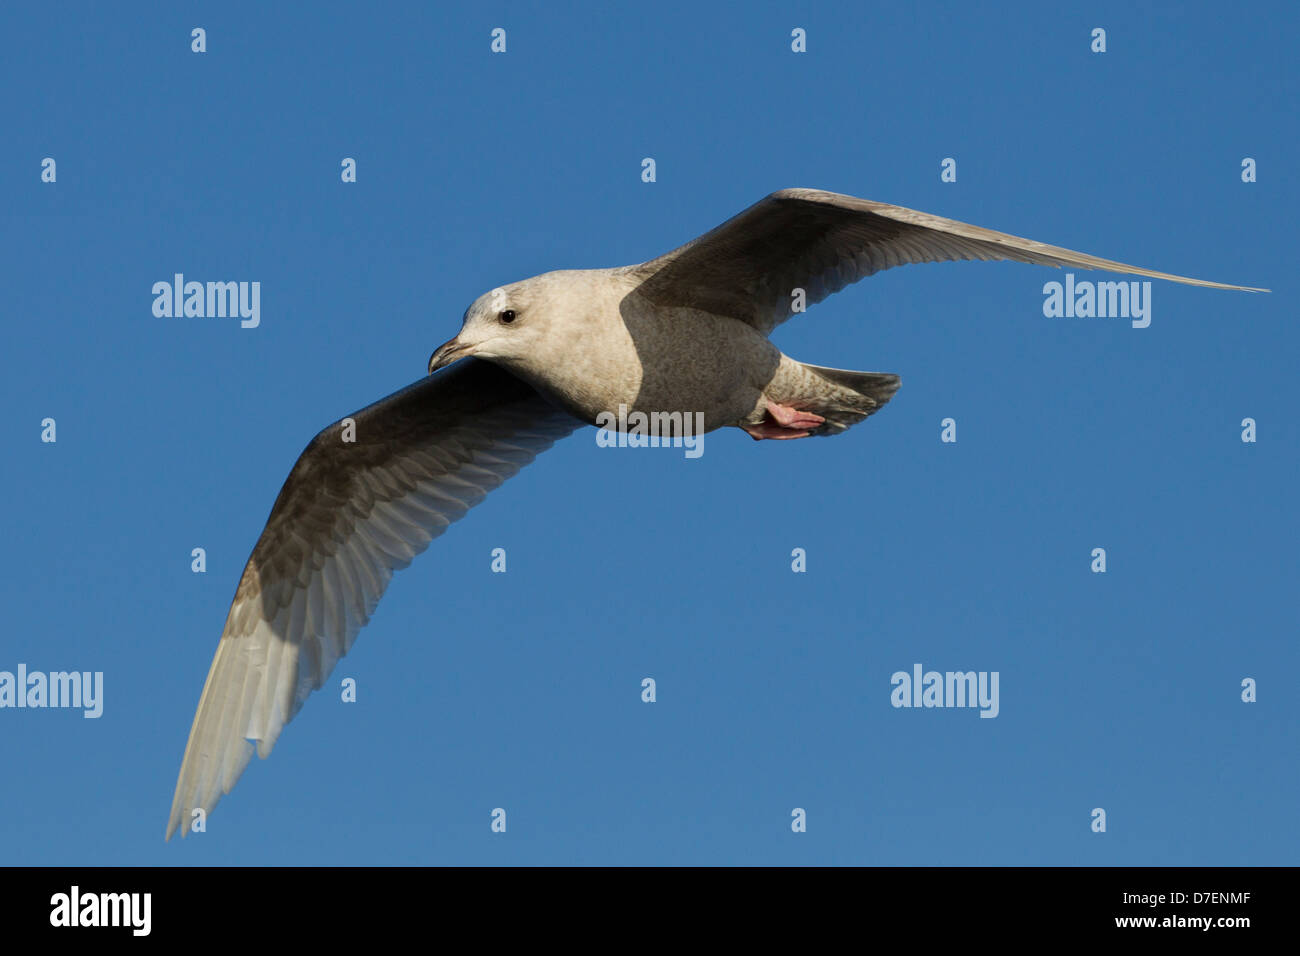 Iceland Gull (Larus glaucoides glaucoides), first winter plumage, in flight over the waters of the Atlantic Ocean Stock Photo